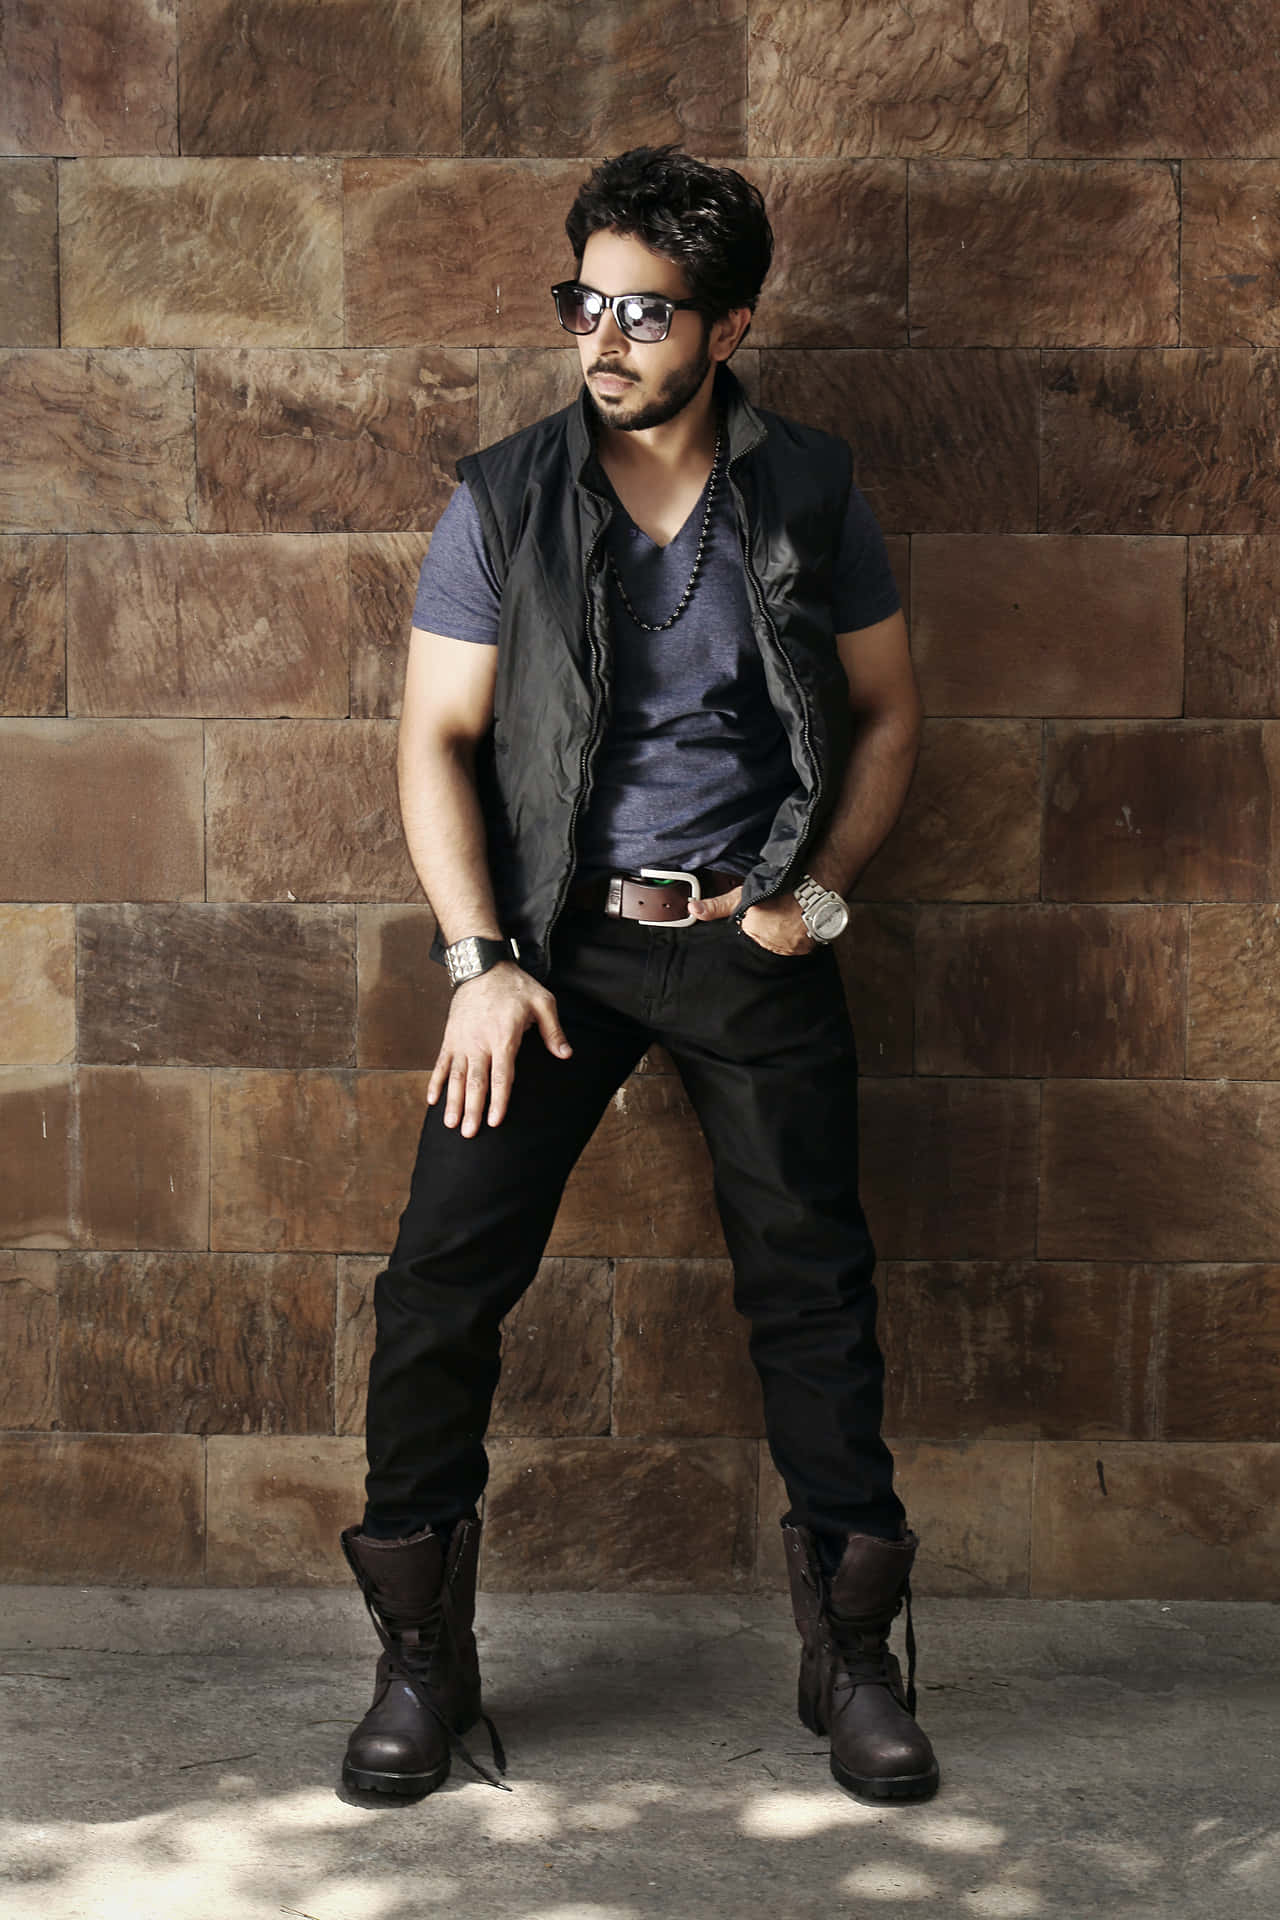 A Man In A Black Vest And Jeans Leaning Against A Brick Wall